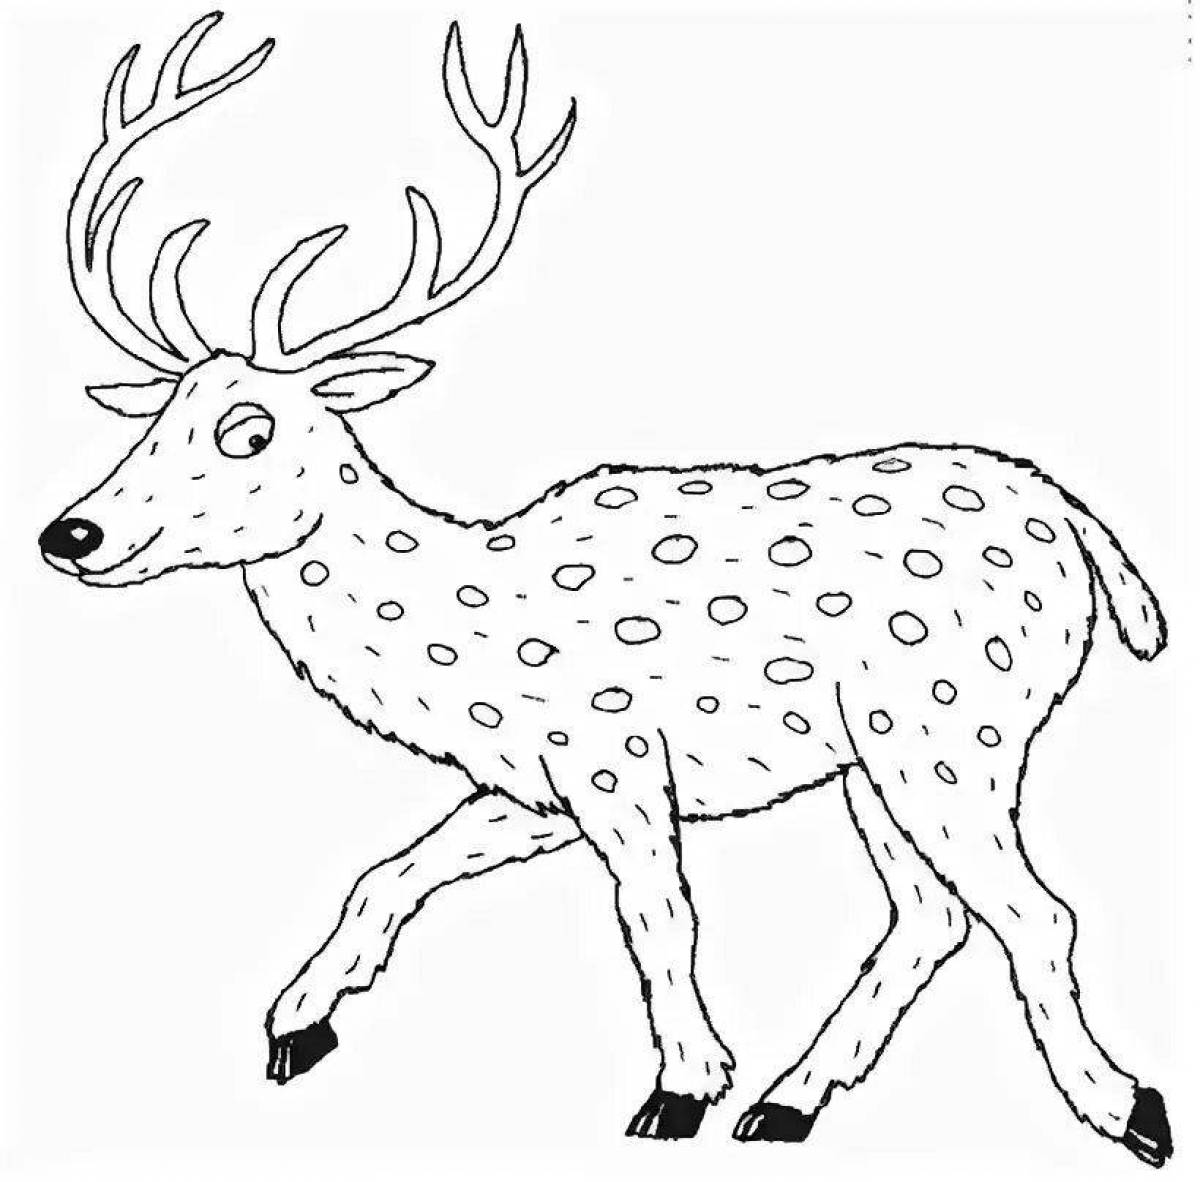 Coloring for a colorful deer by a lucky chance